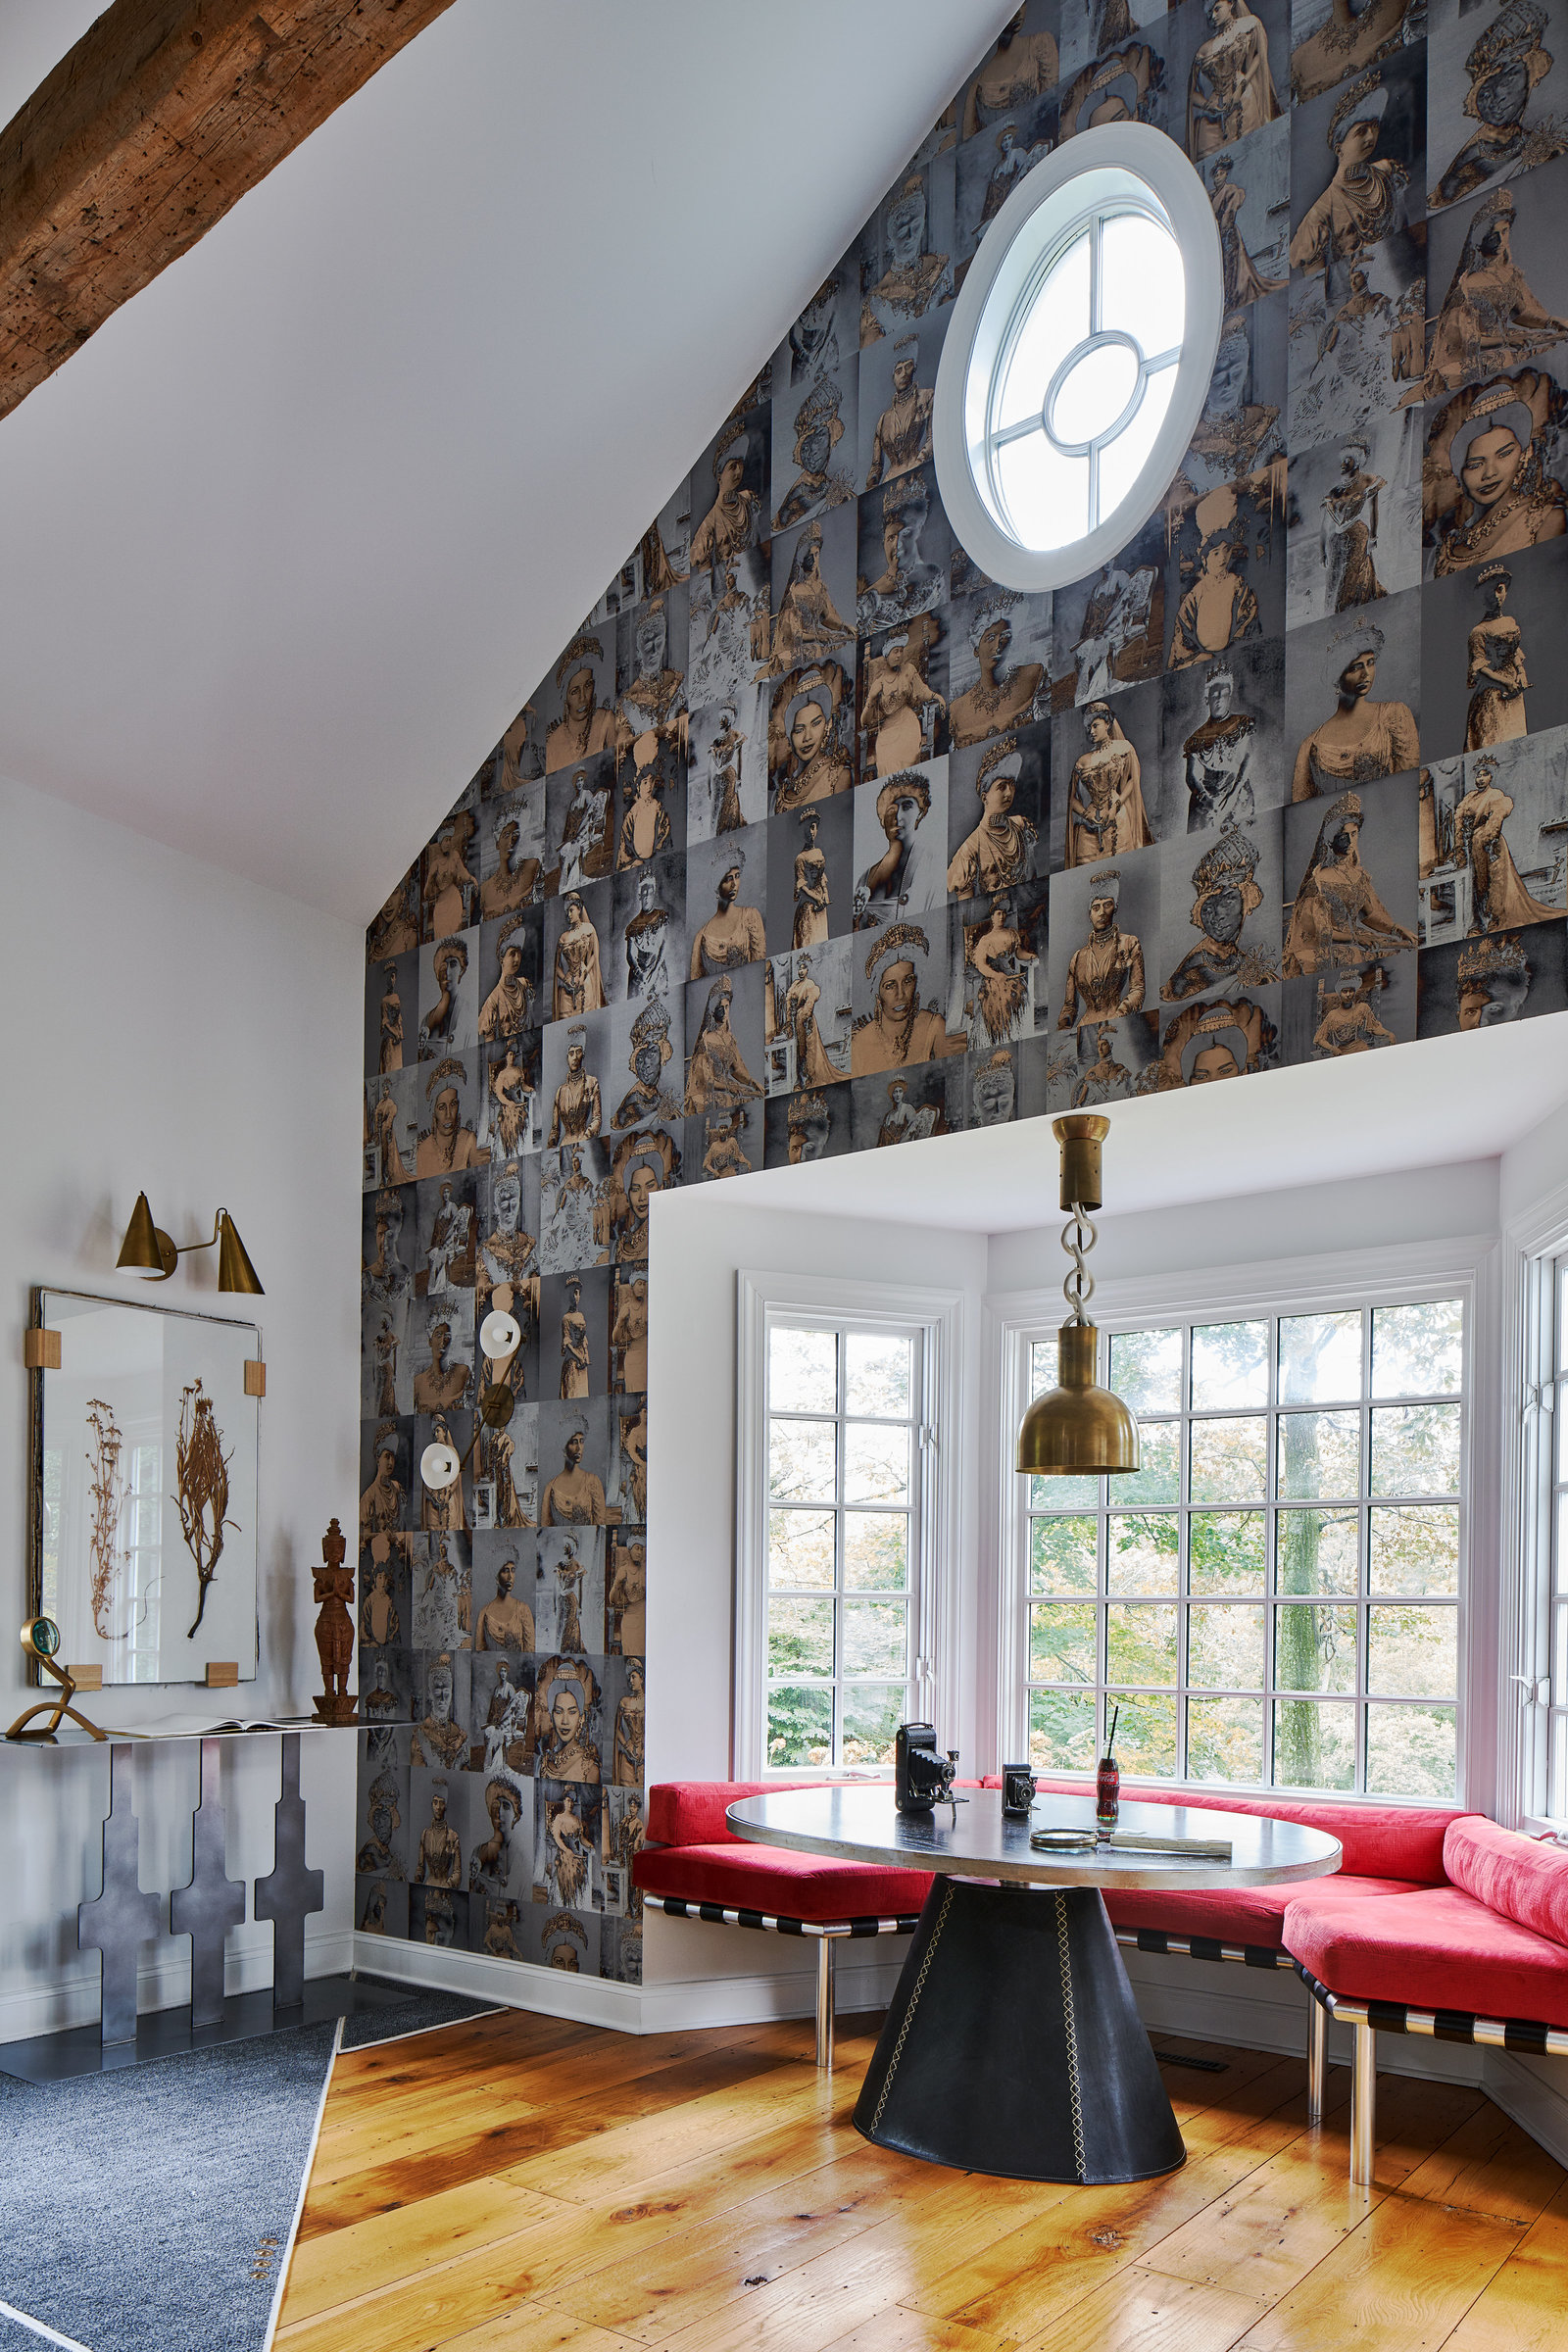 queens of the world depicted in wallpaper for feature wall in a family room with vaulted ceiling